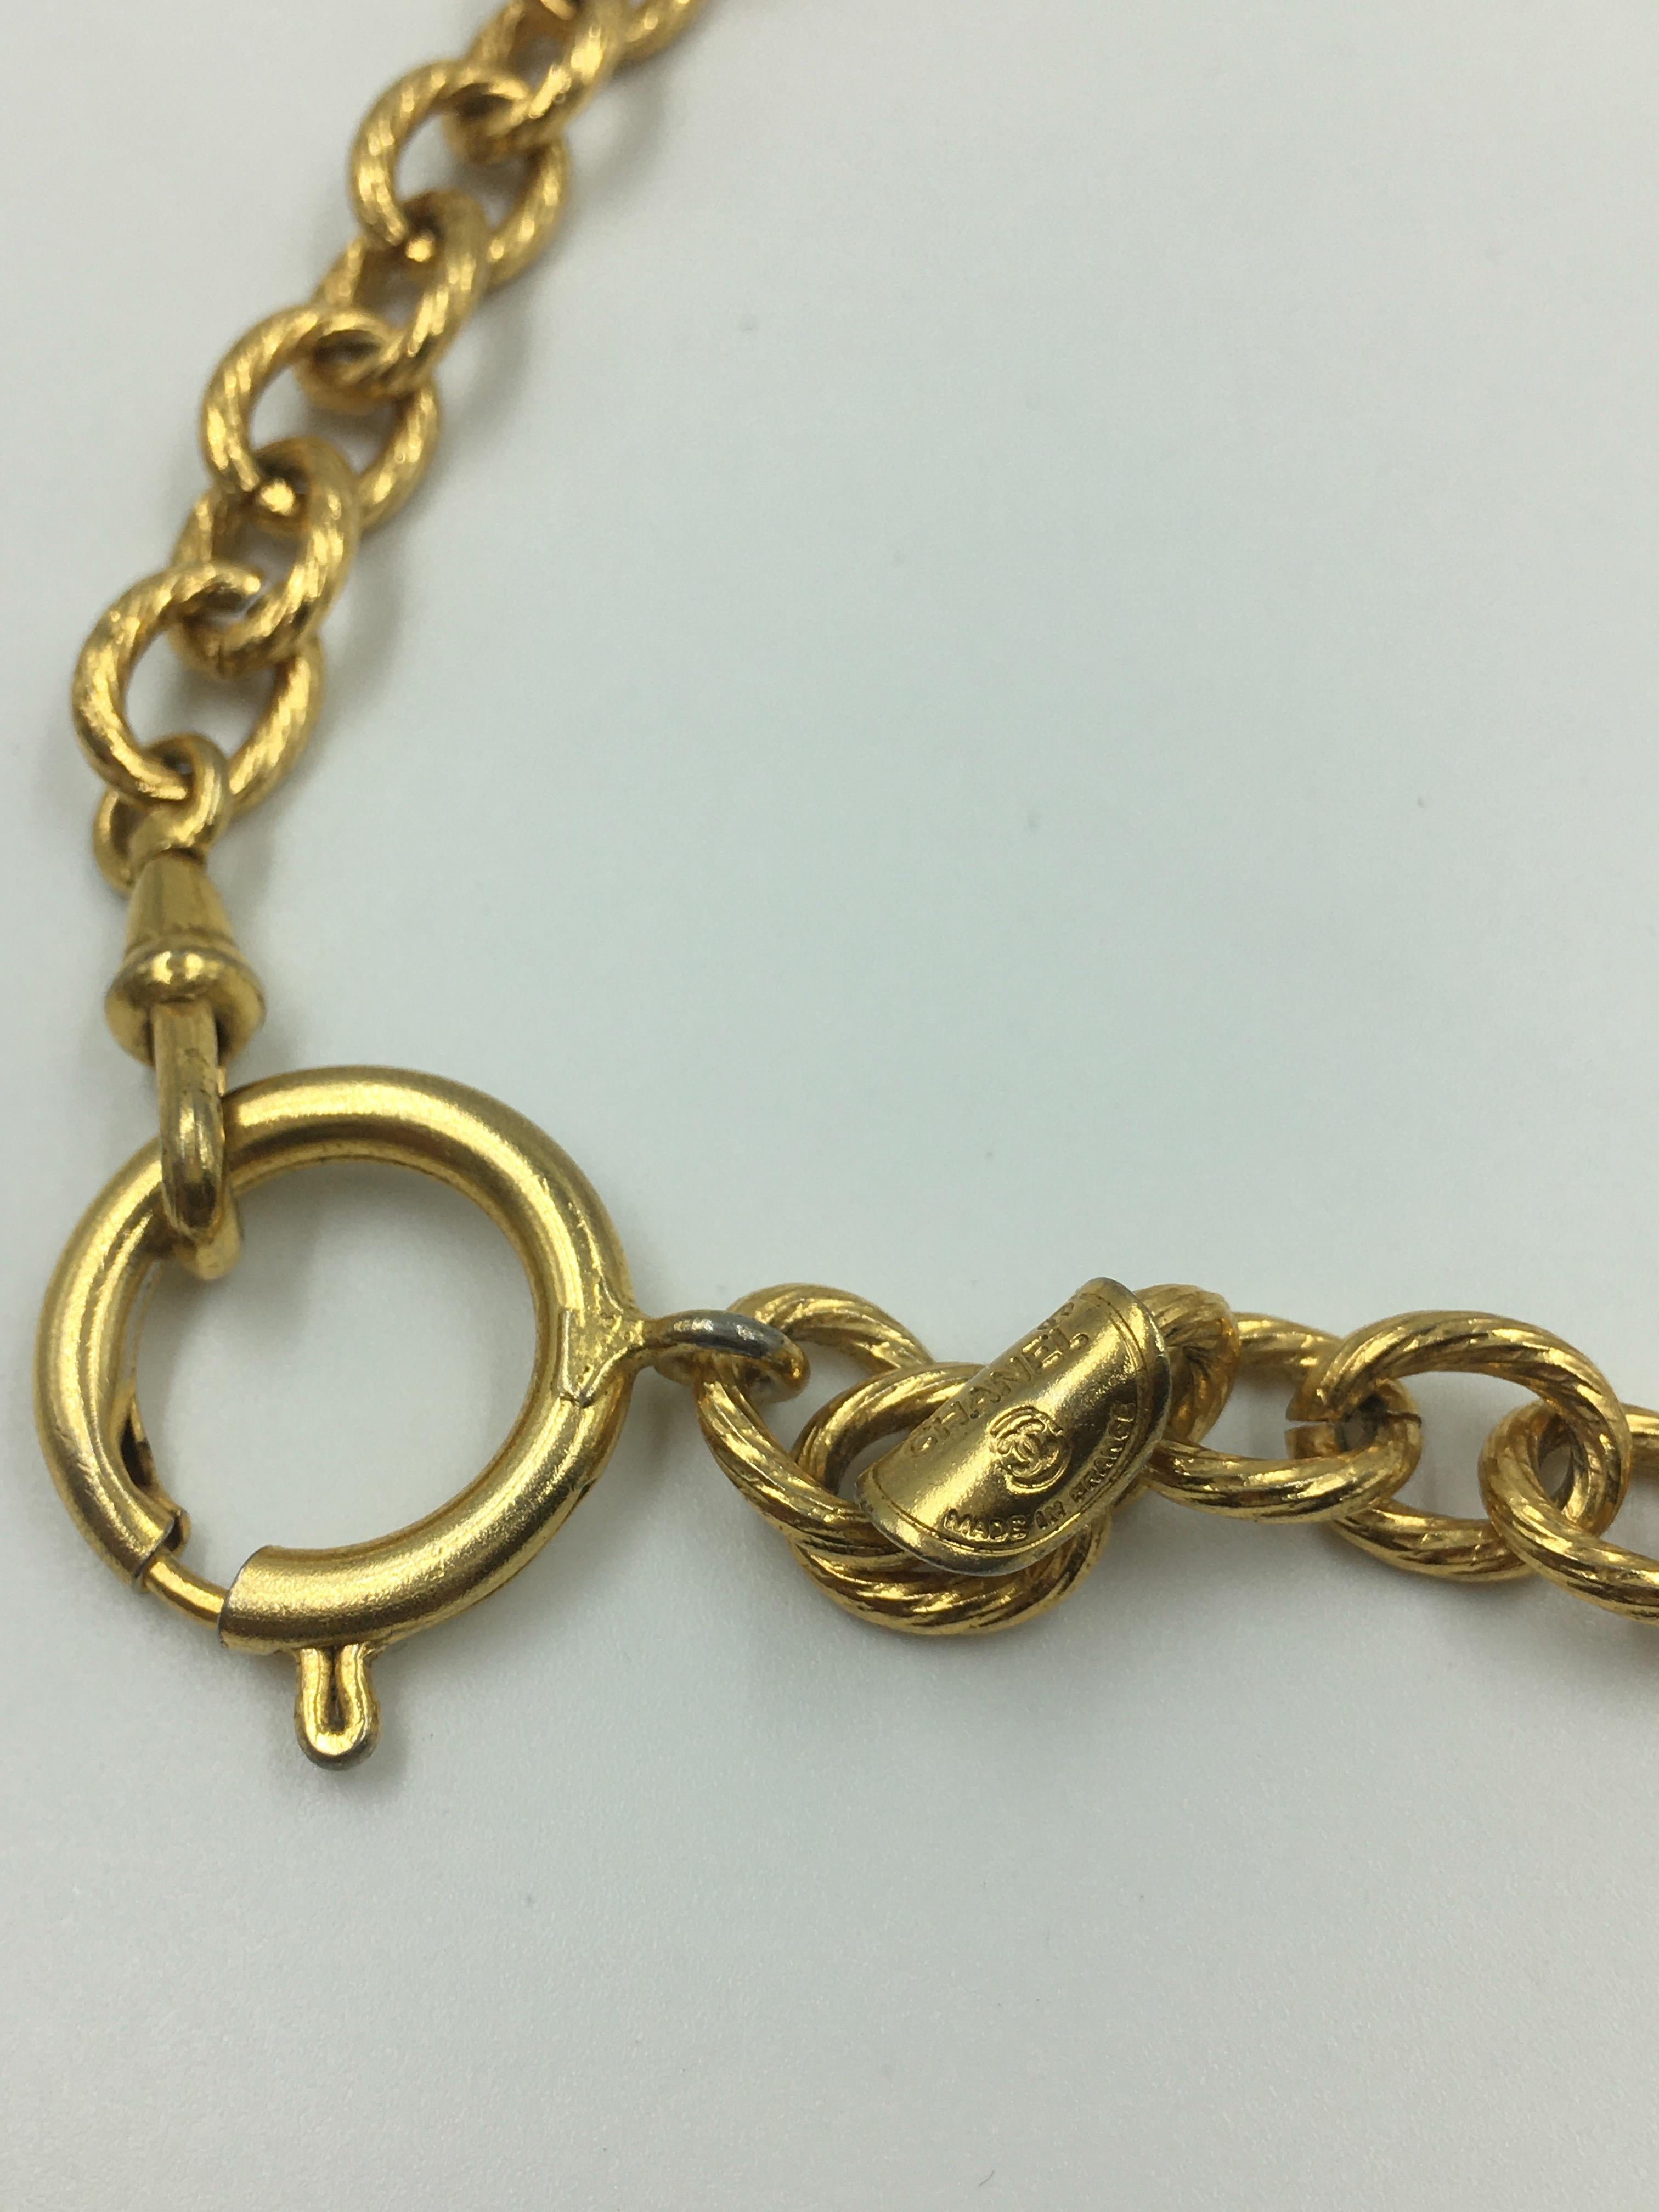 Chanel large 6 Charm Necklace rare iconic gold tone metal In Good Condition For Sale In Los Angeles, CA